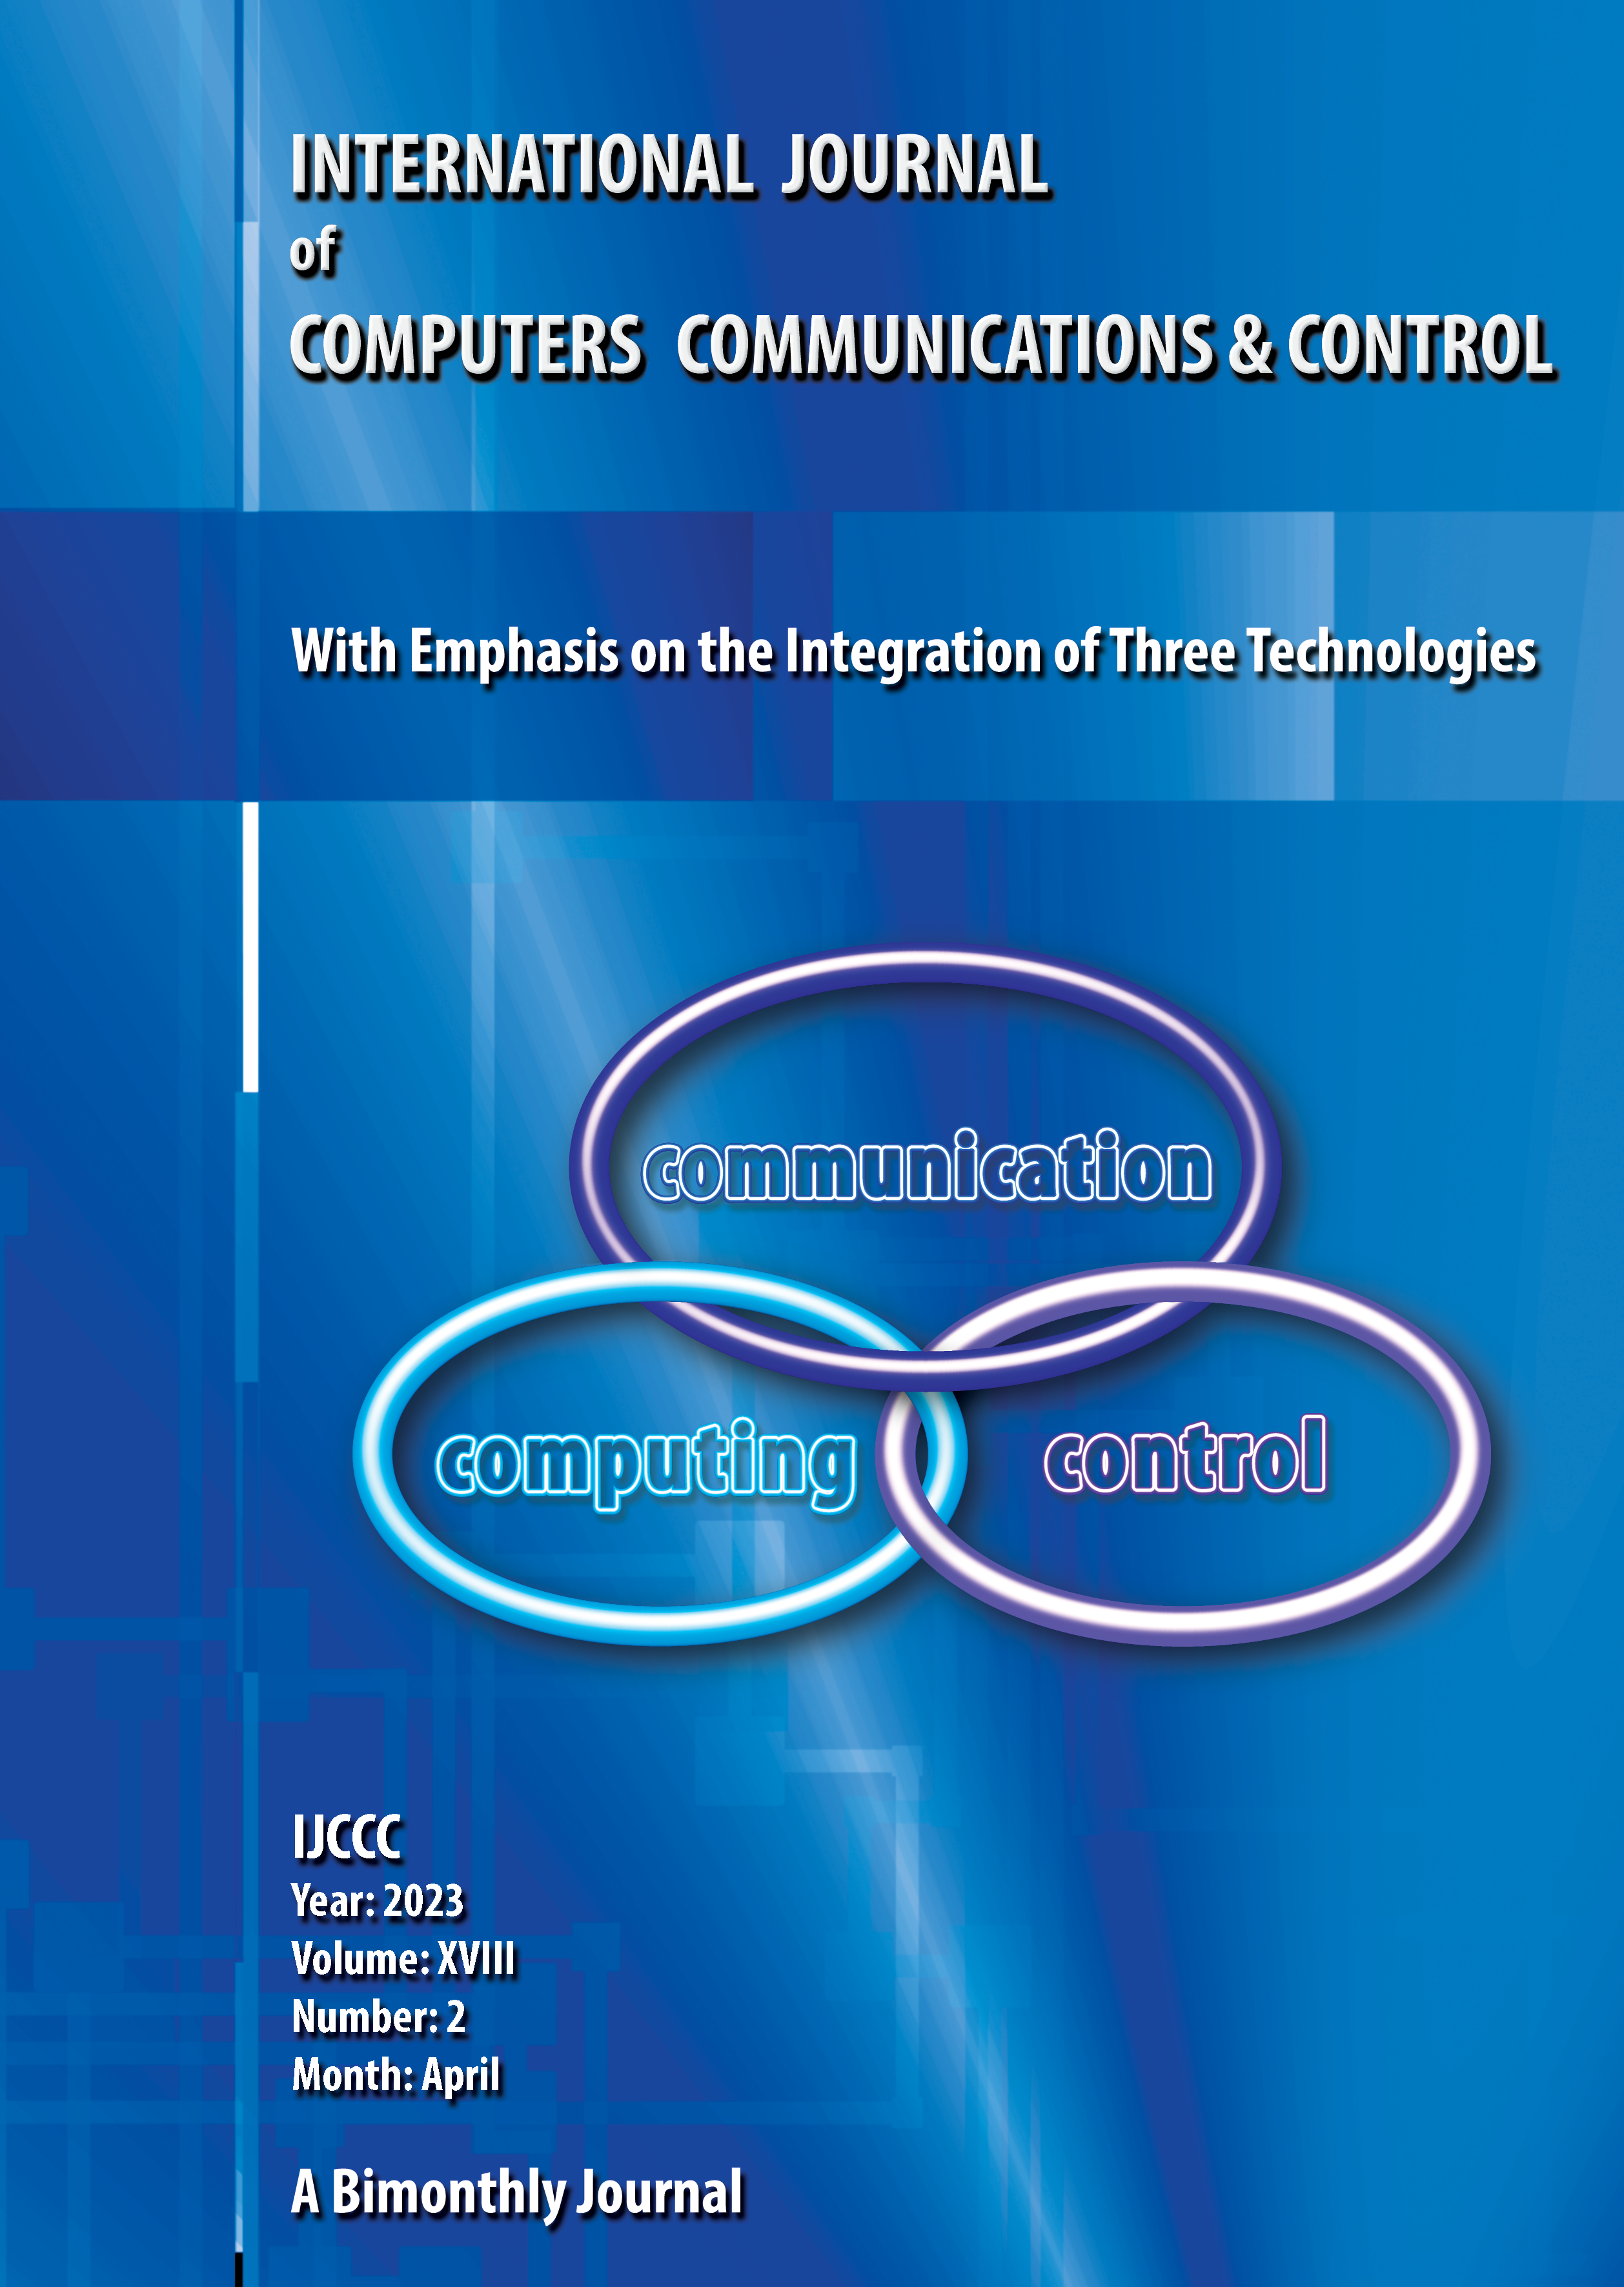 					View Vol. 18 No. 2 (2023): International Journal of Computers Communications & Control (April)
				